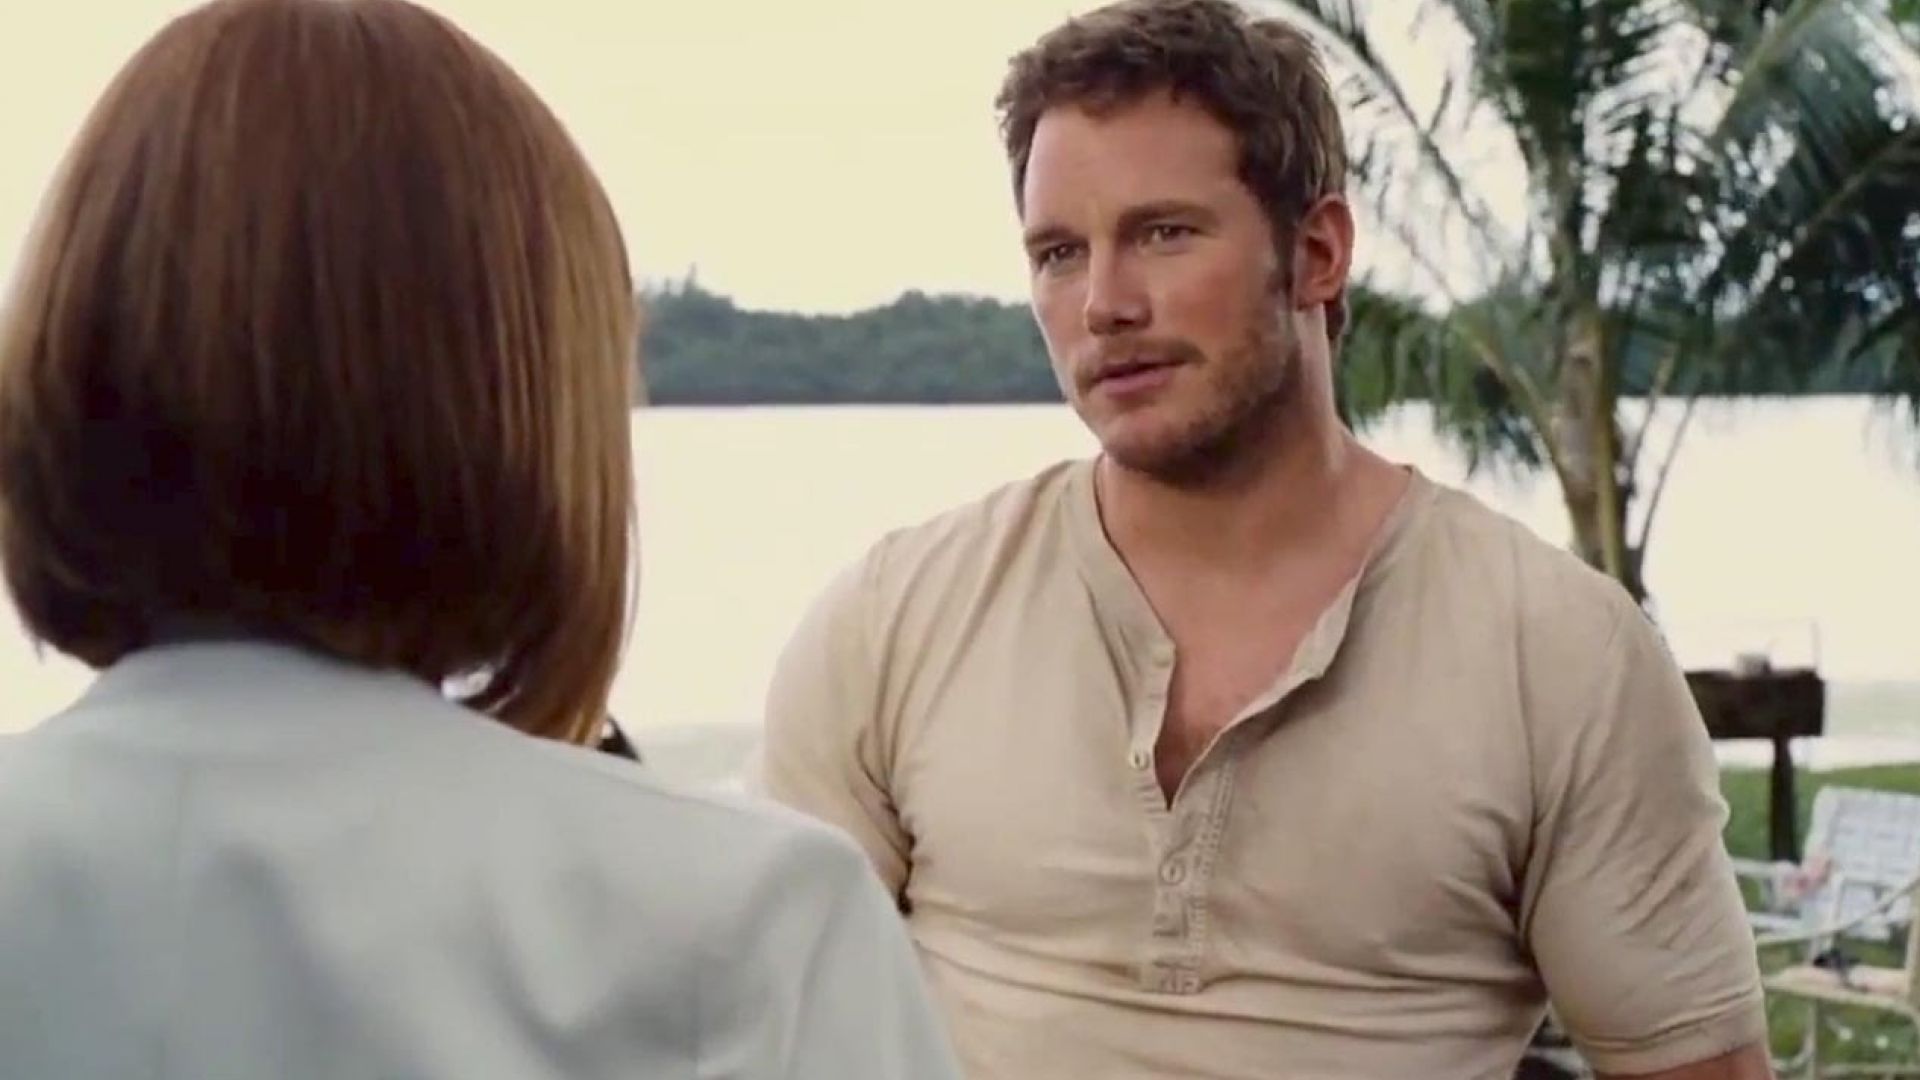 Control the Raptors in First Clip from 'Jurassic World'